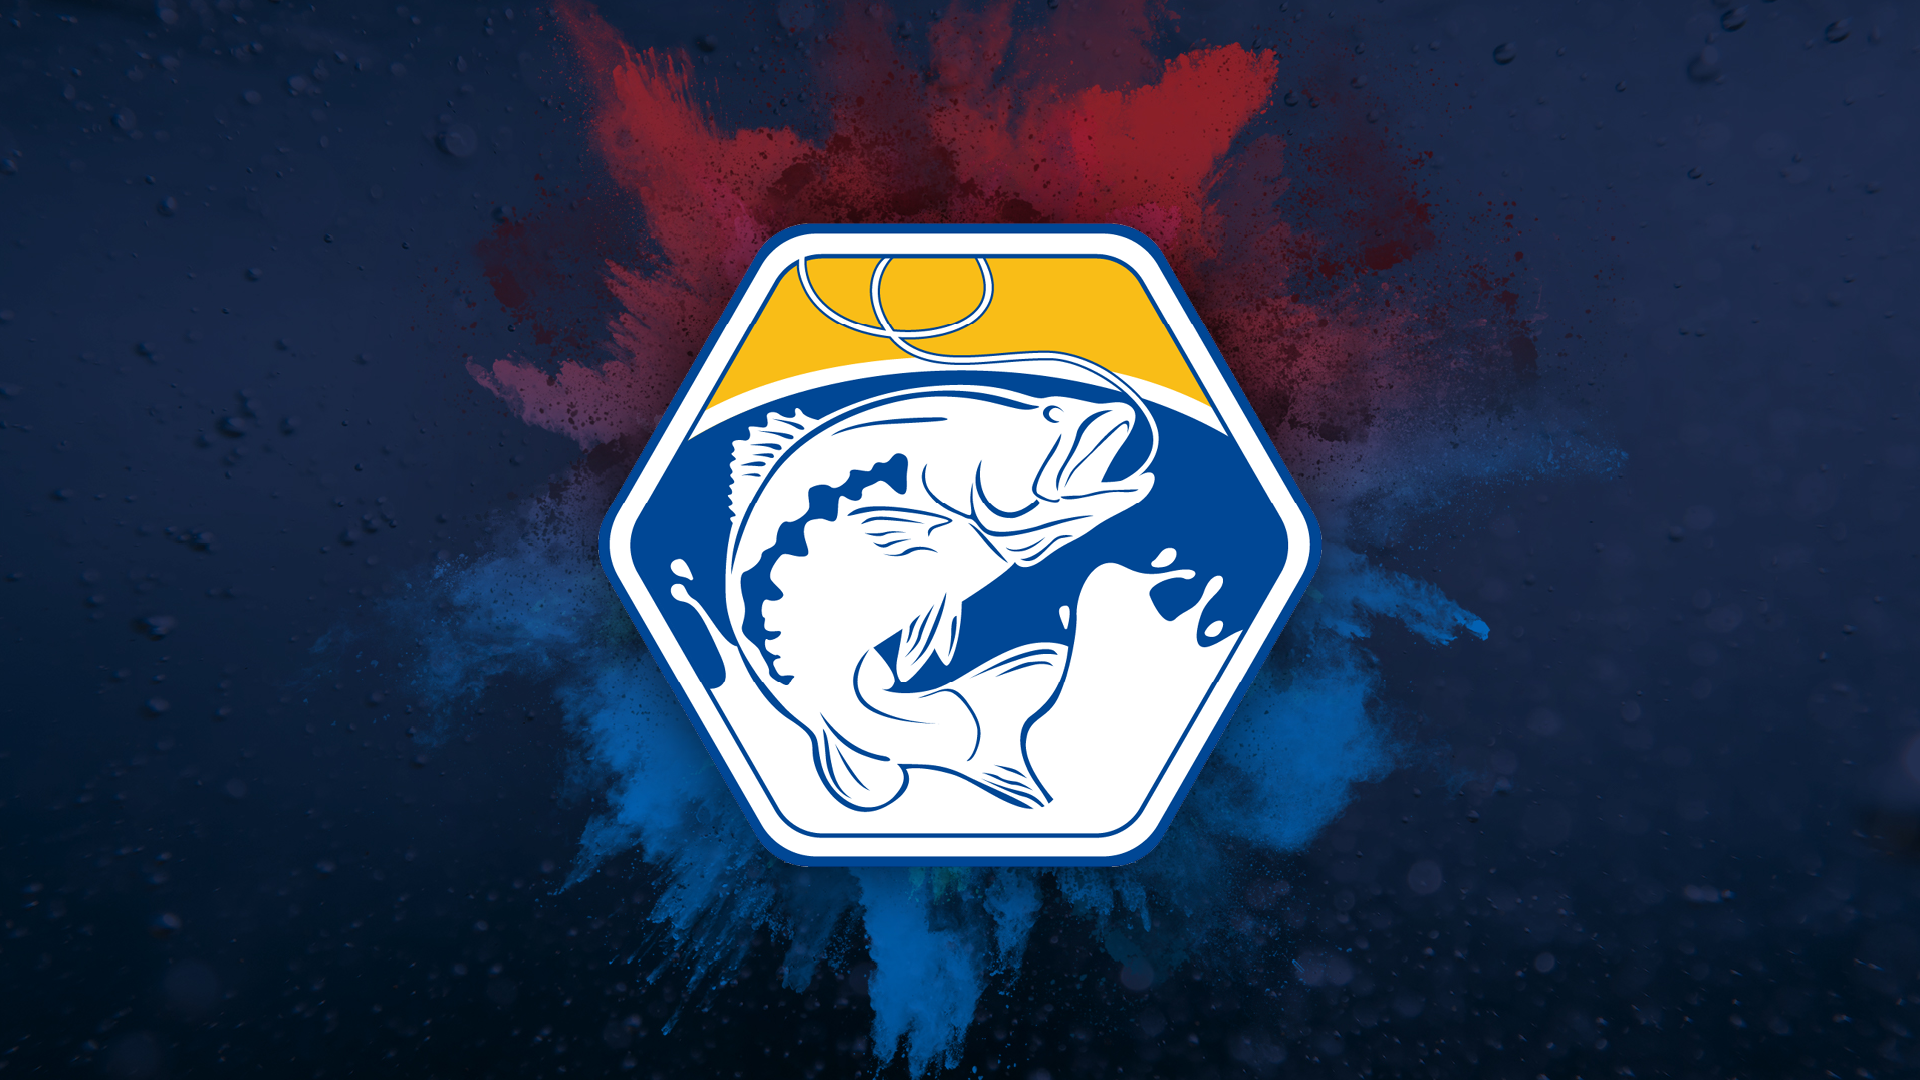 Icon for Biting the Bait!